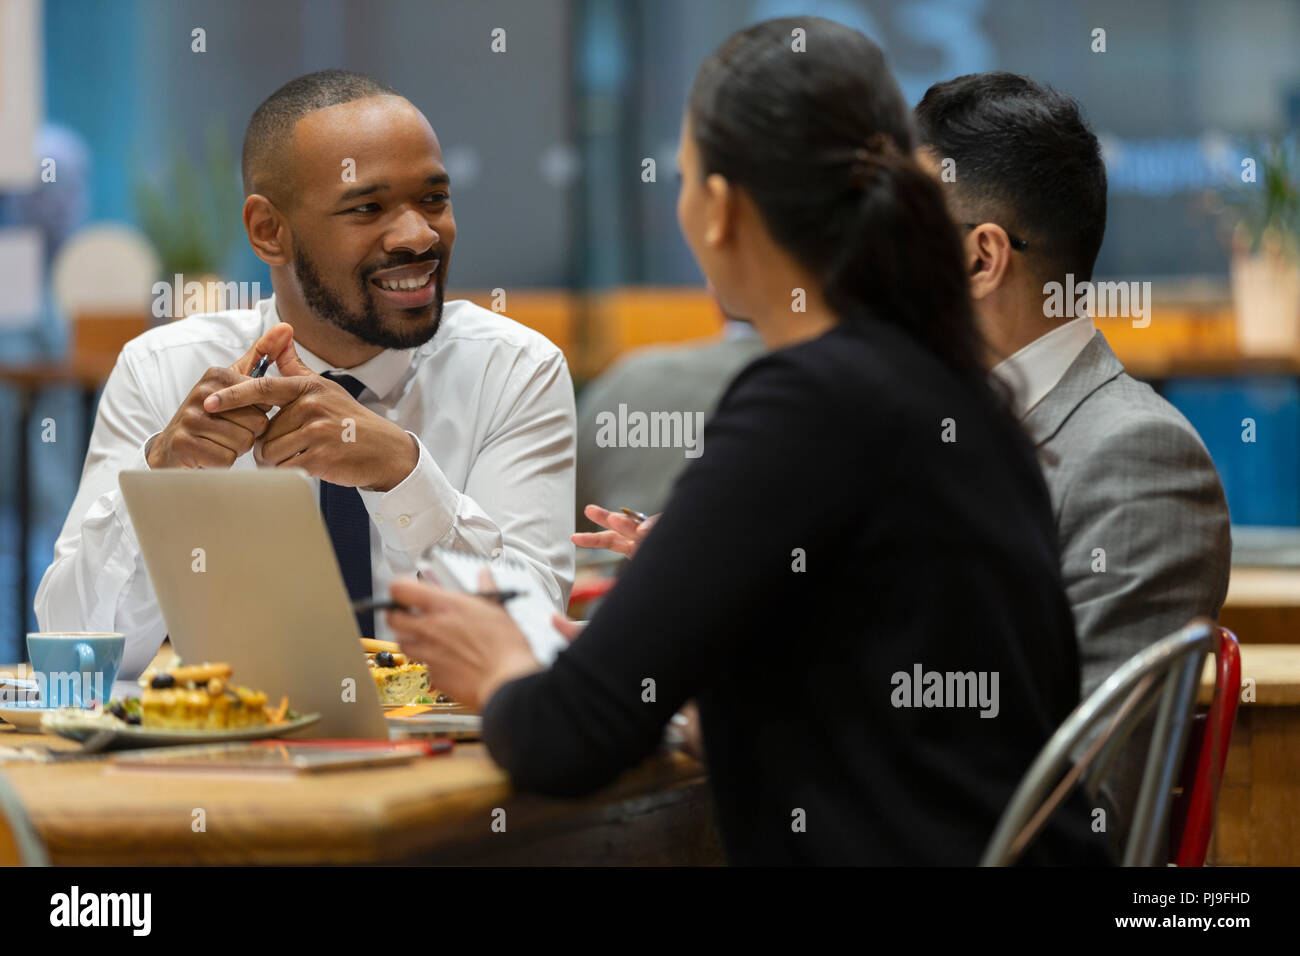 Business people meeting, working in cafe Stock Photo